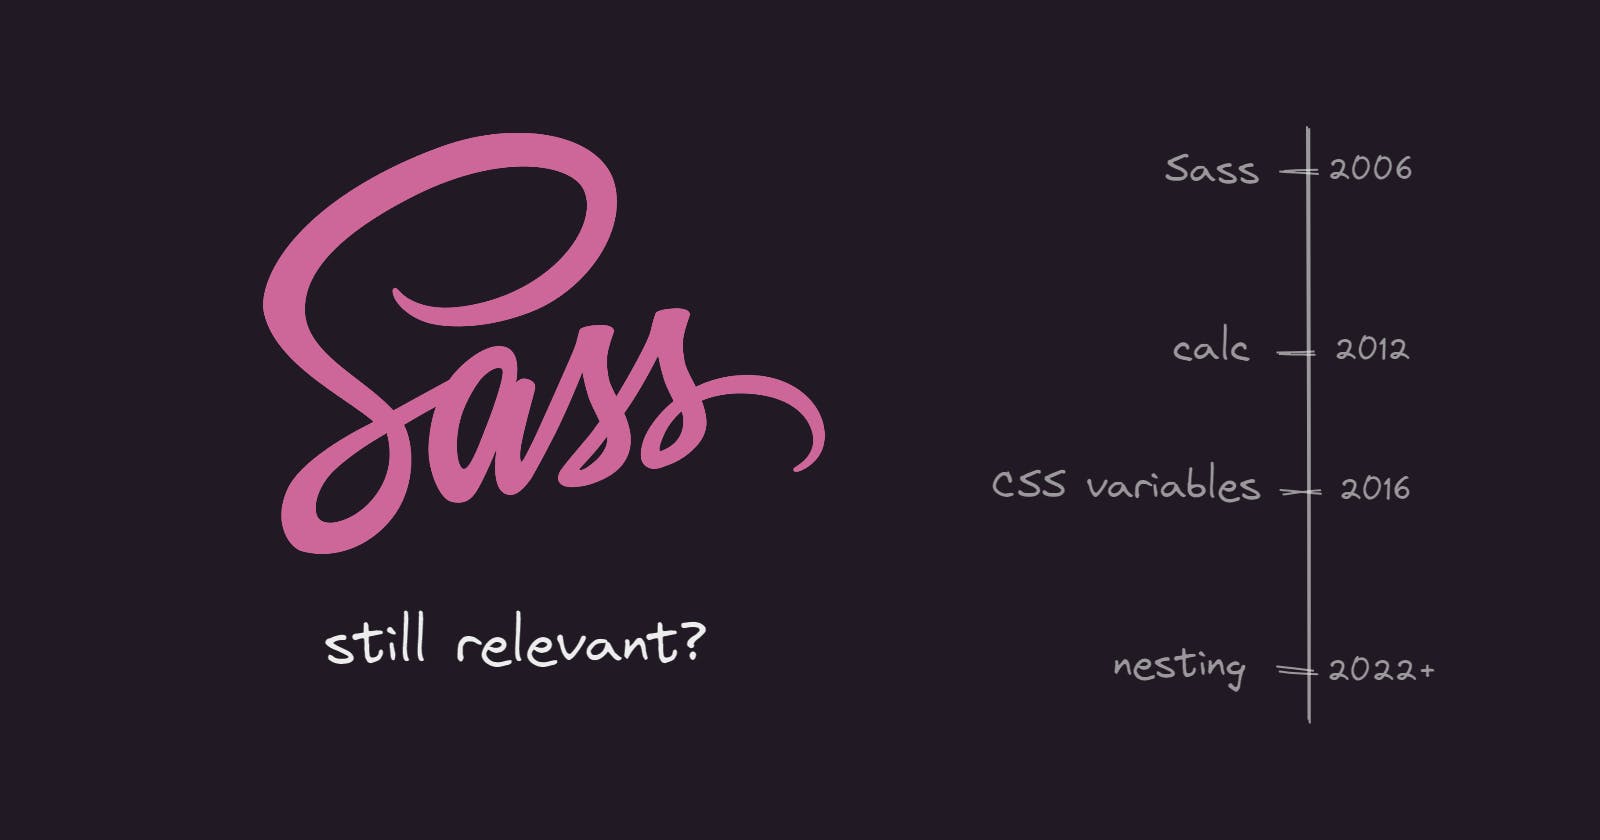 The case for using Sass in 2022